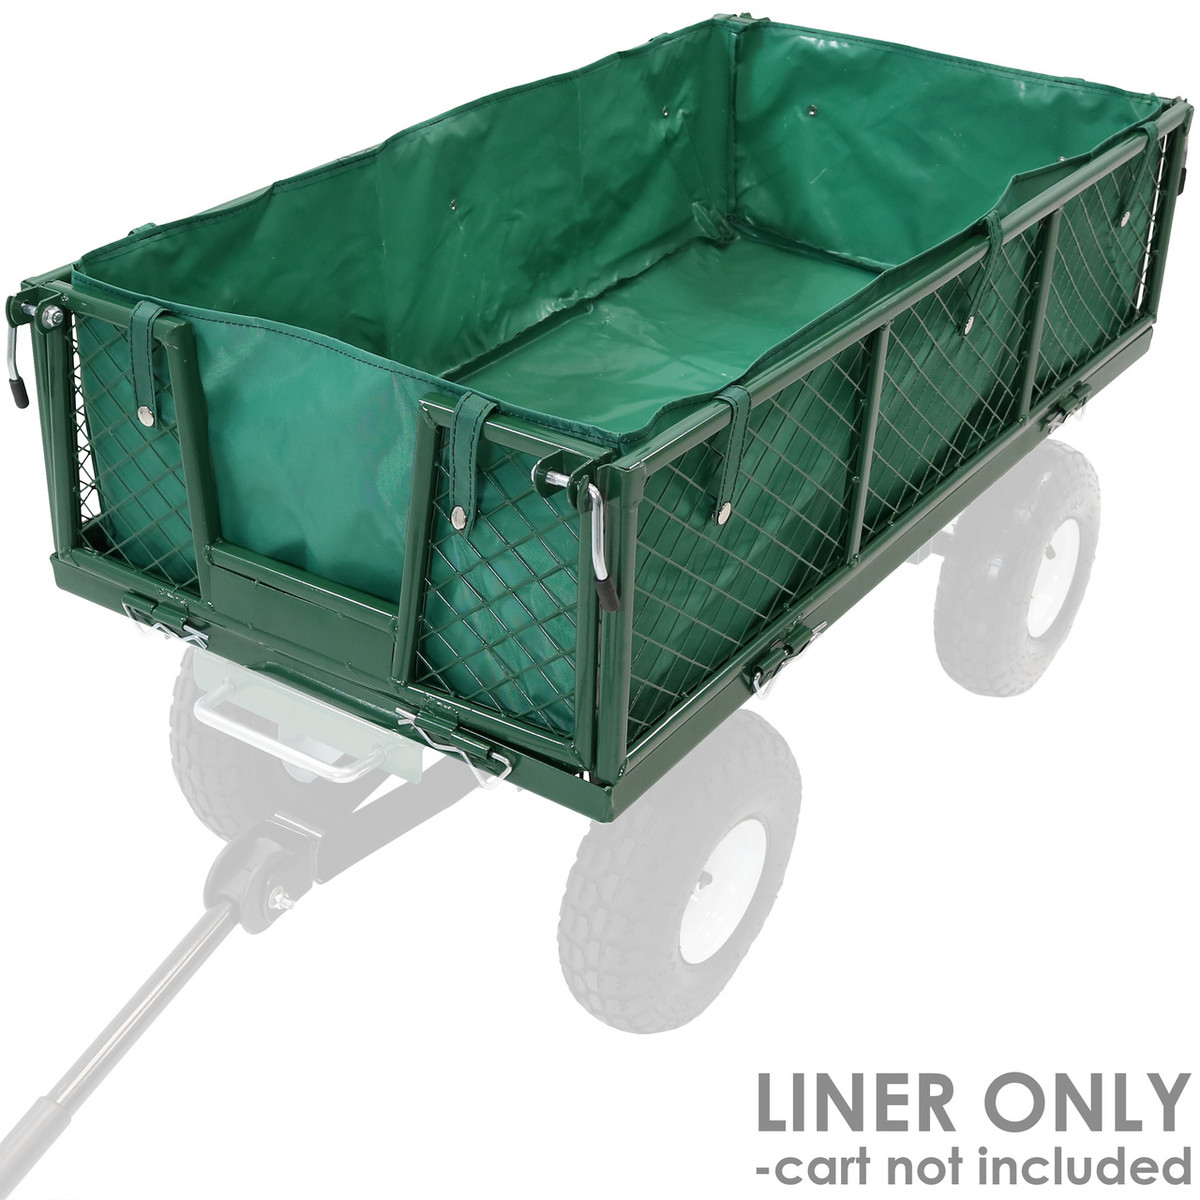 Includes Liner Only Sunnydaze Heavy-Duty Dumping Utility Cart Liner Green 